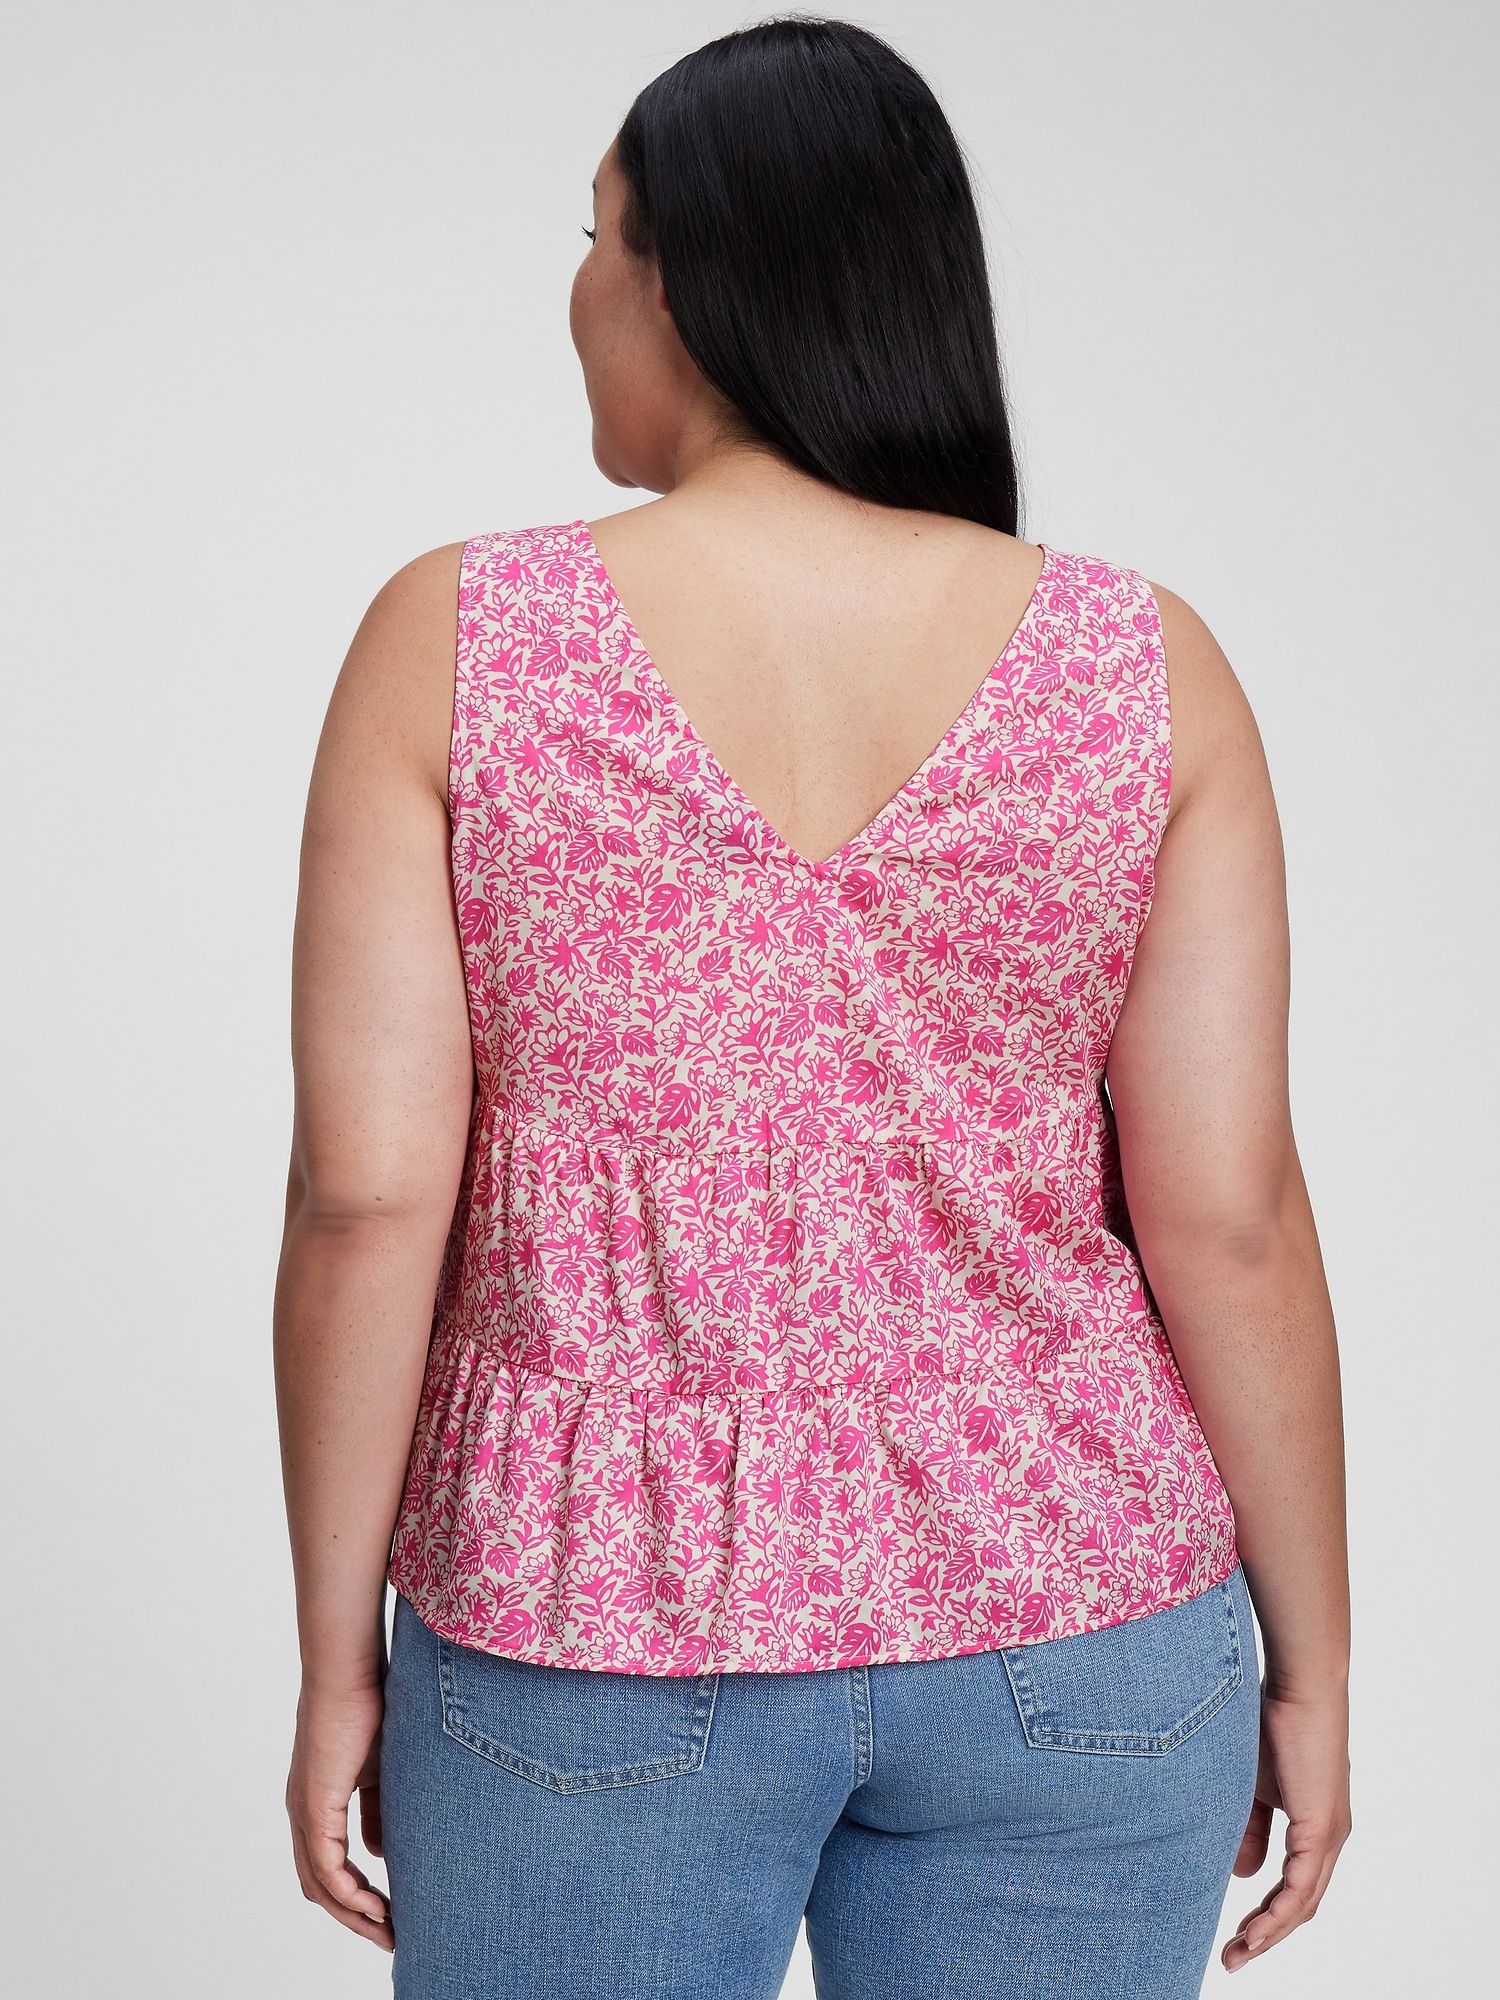 Lucky Brand Womens Floral Printed Sleeveless Camisole Top